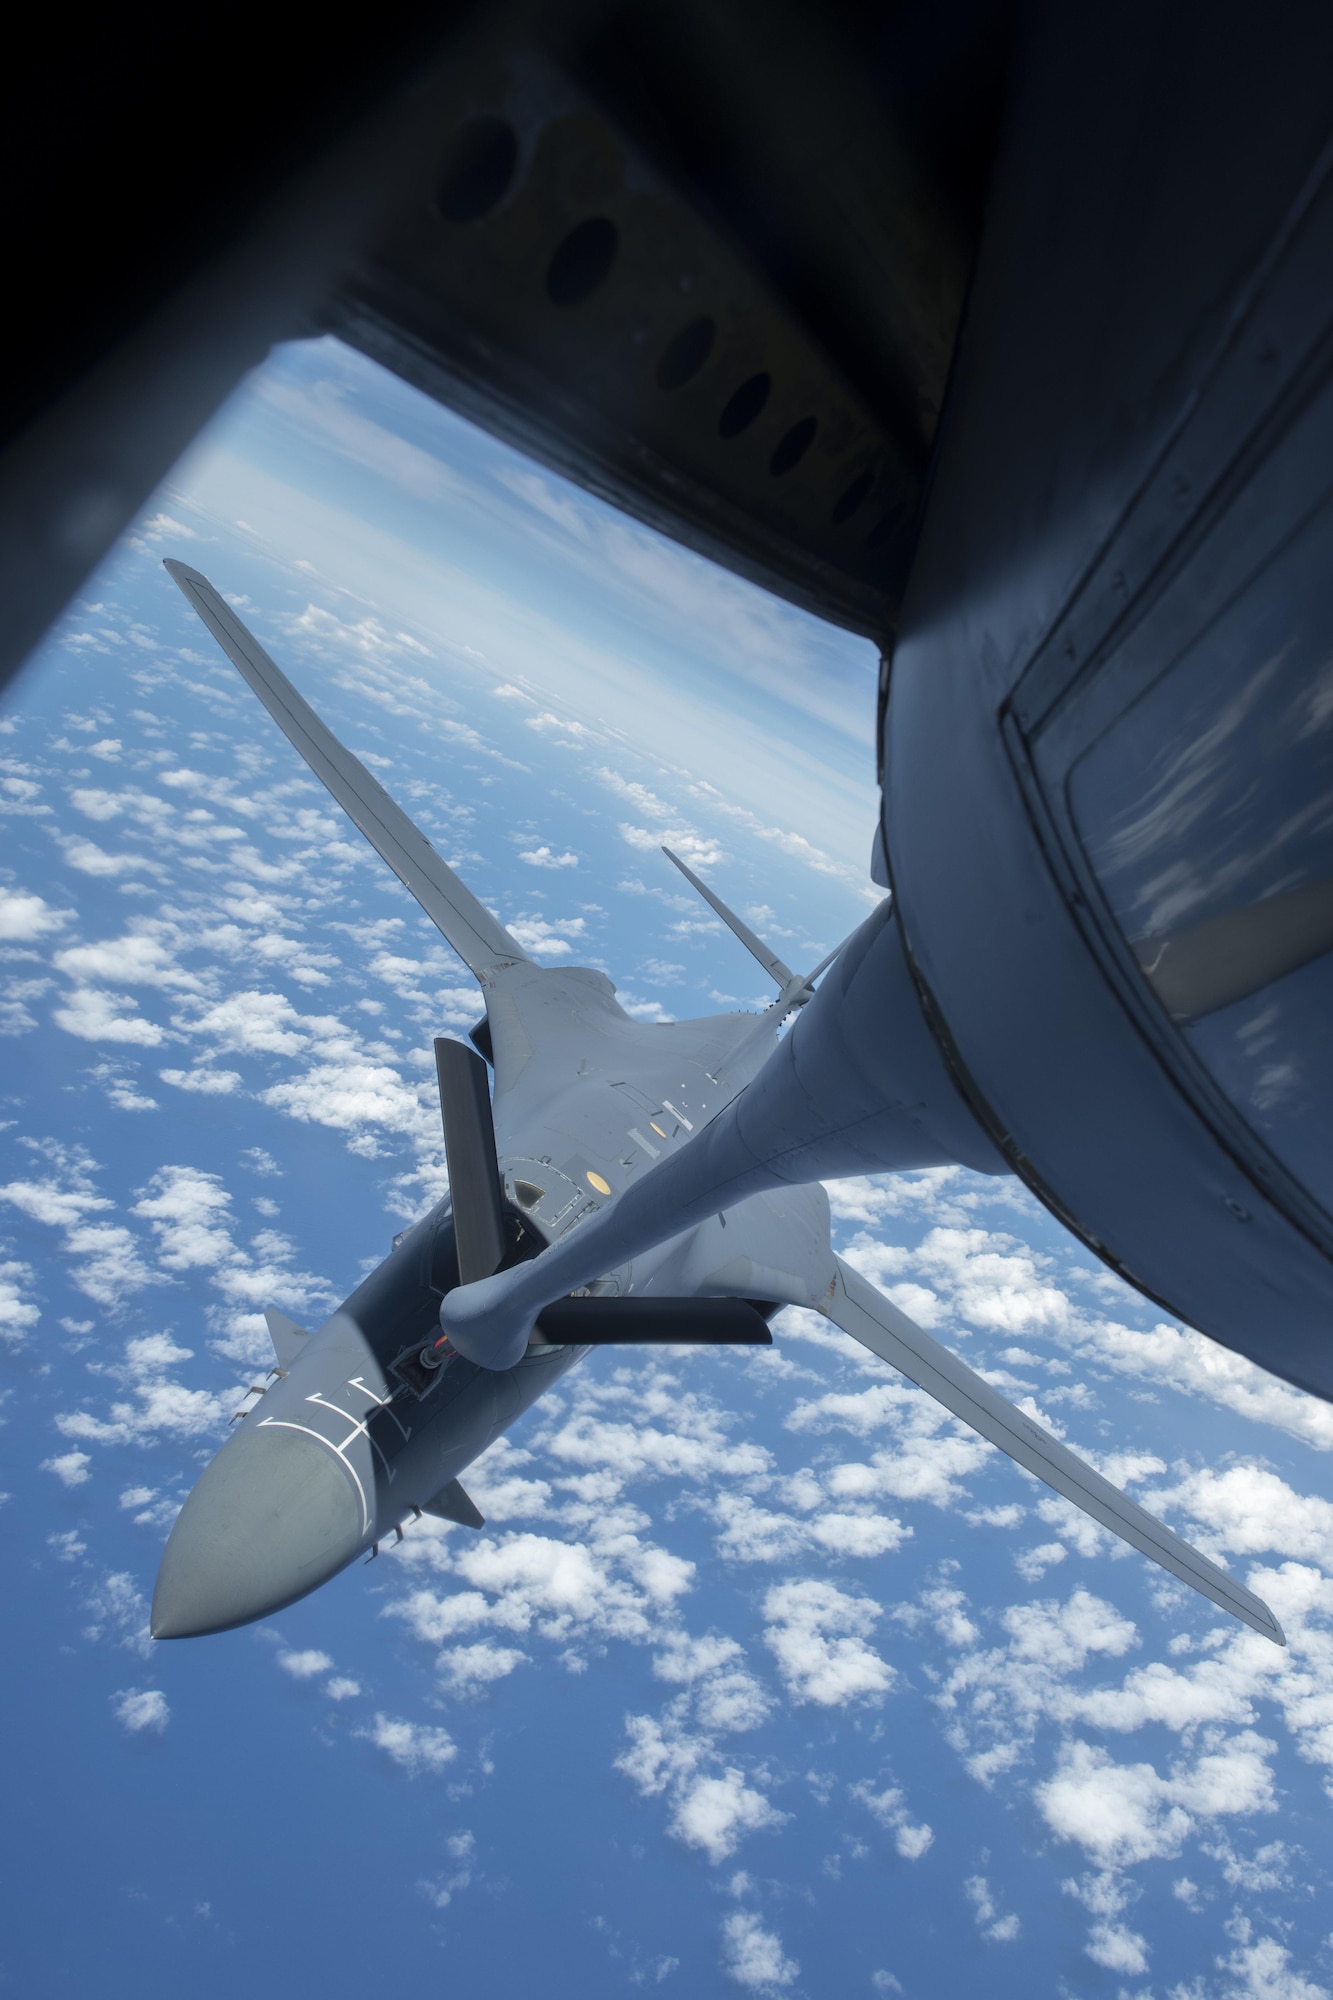 A B-1B Lancer assigned to the 9th Expeditionary Bomb Squadron receives fuel from a 909th Air Refueling Squadron KC-135 Stratotanker during exercise Cope North, Feb. 21, 2017. The 909th ARS’s motto, ‘always there,’ symbolizes the squadron’s constant presence and devotion to support allies and partners throughout the Indo-Asia Pacific region. (U.S. Air Force photo/Senior Airman John Linzmeier)